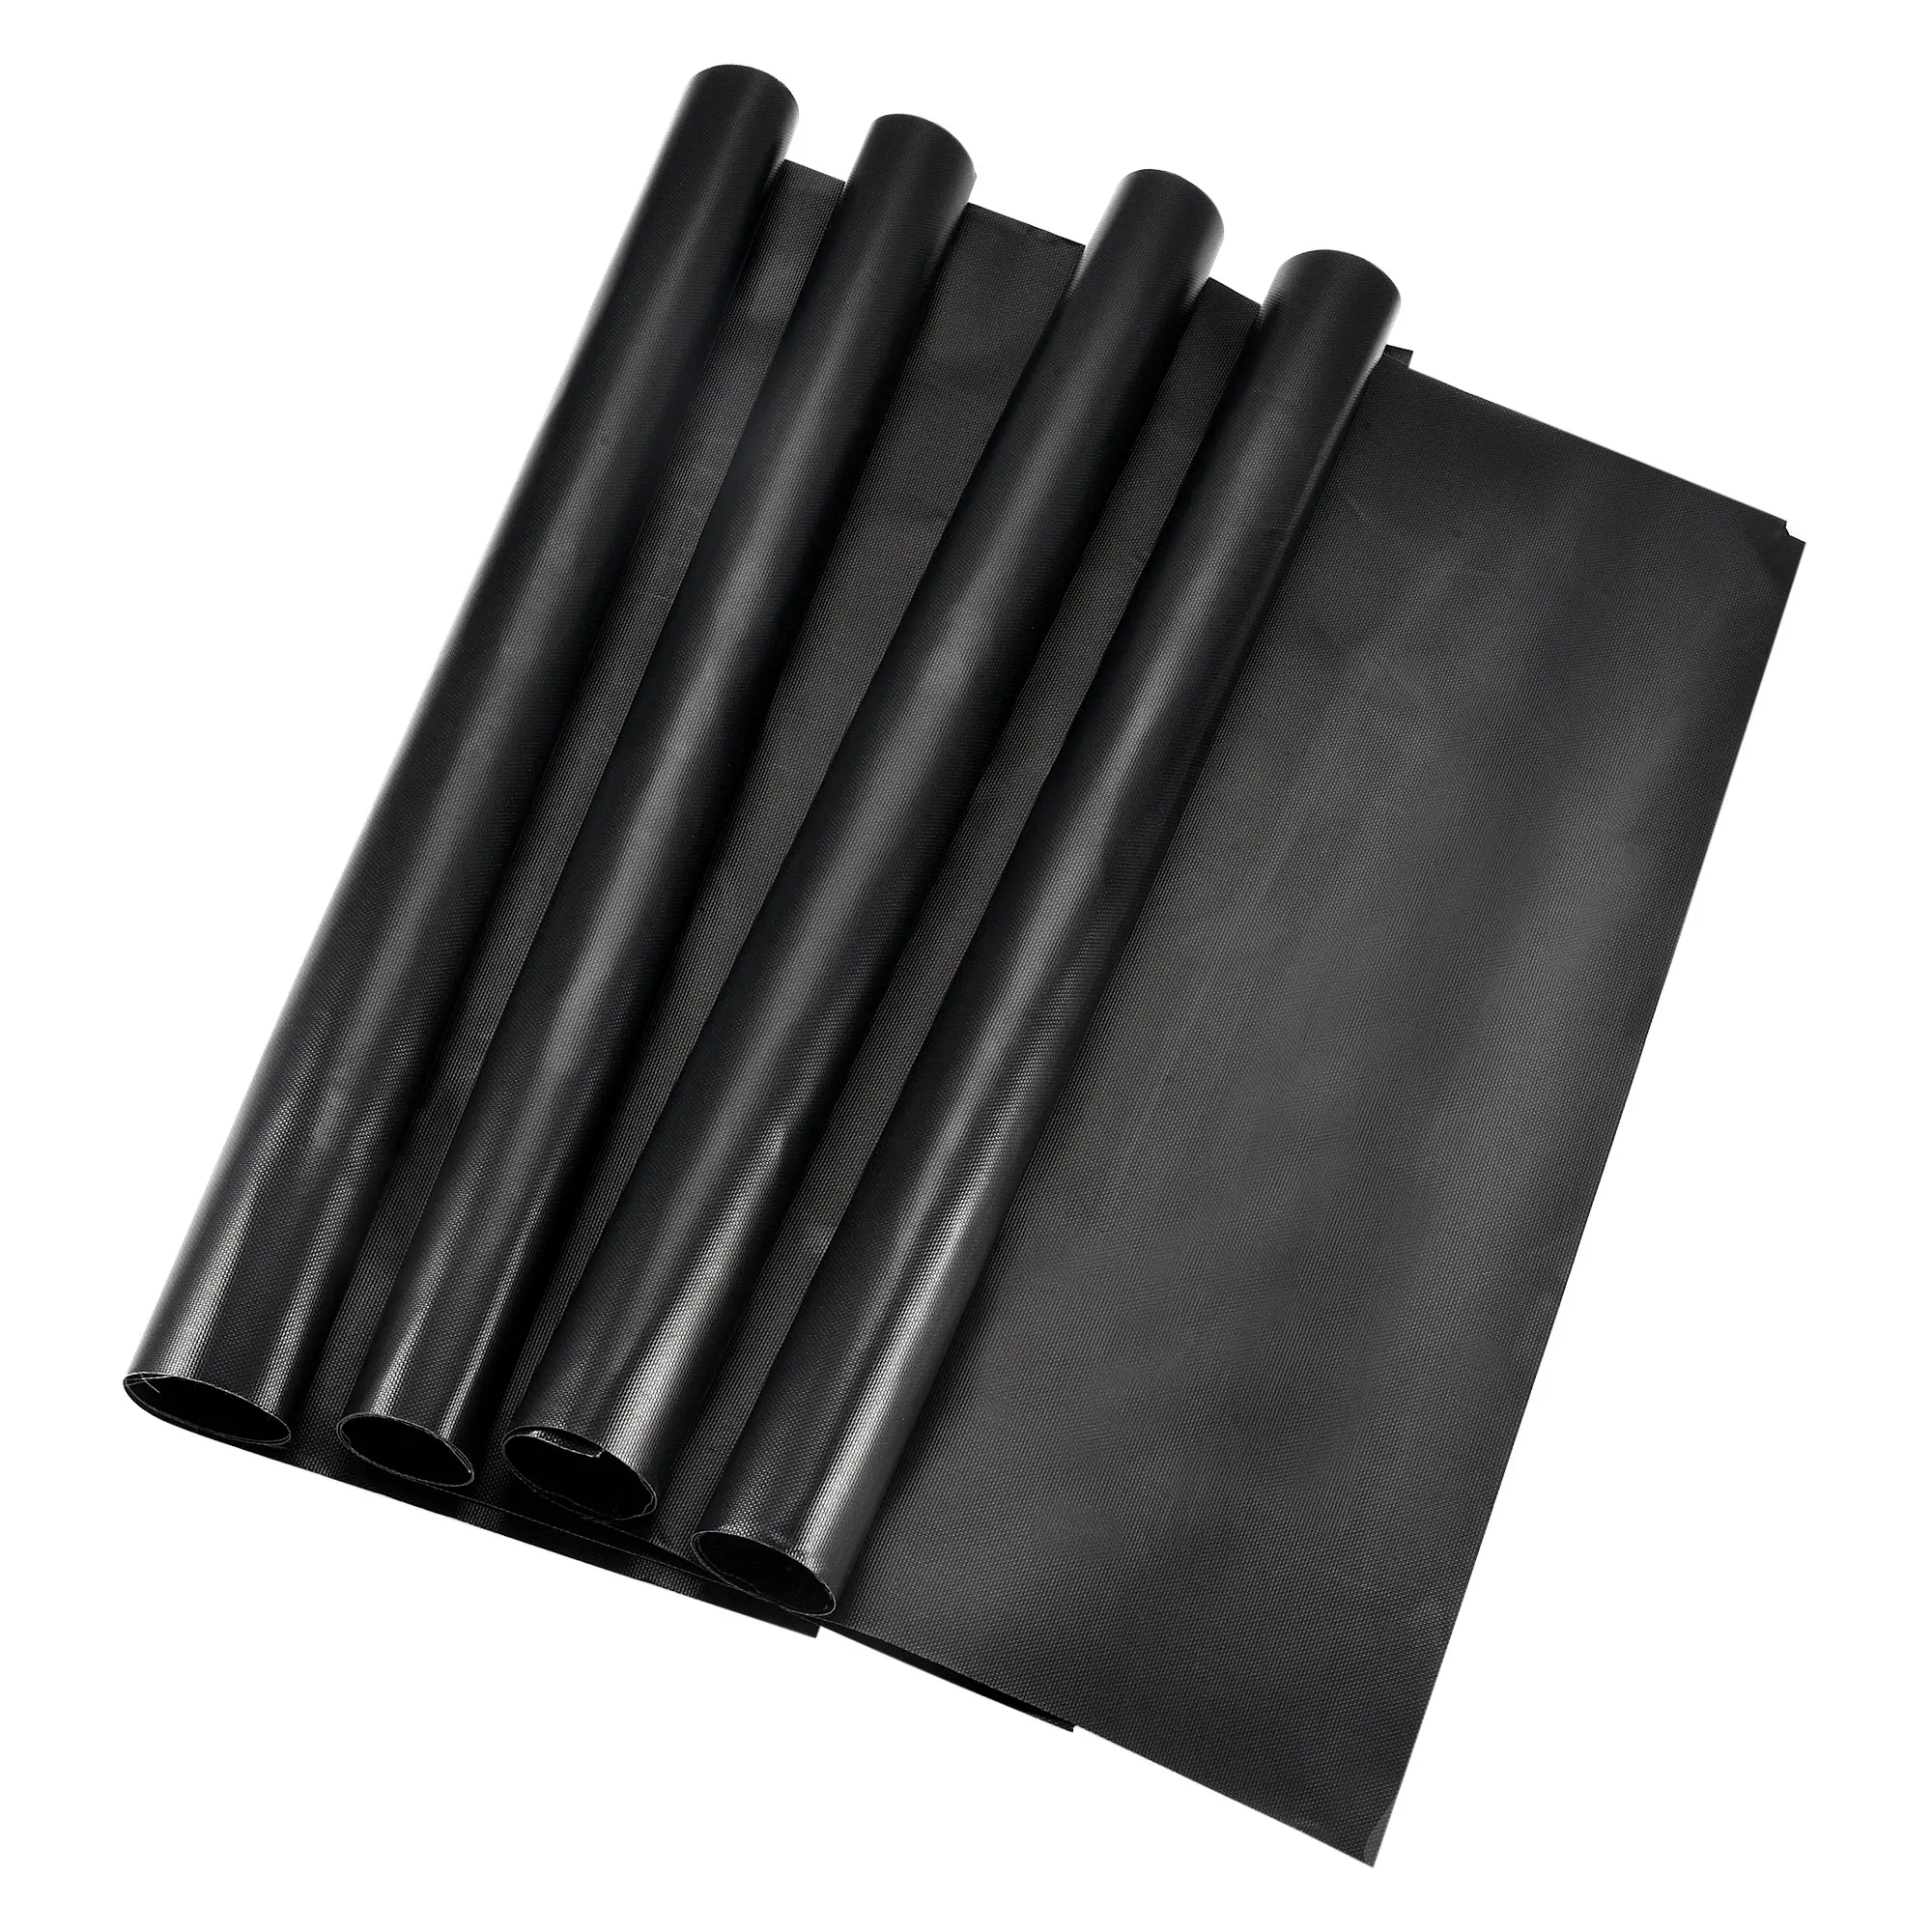 

Uxcell 400x400mm Non-Stick Stove Covers, Clean Mat Pad Range Protectors Liner Covers PTFE Sheet Black 4 Pcs